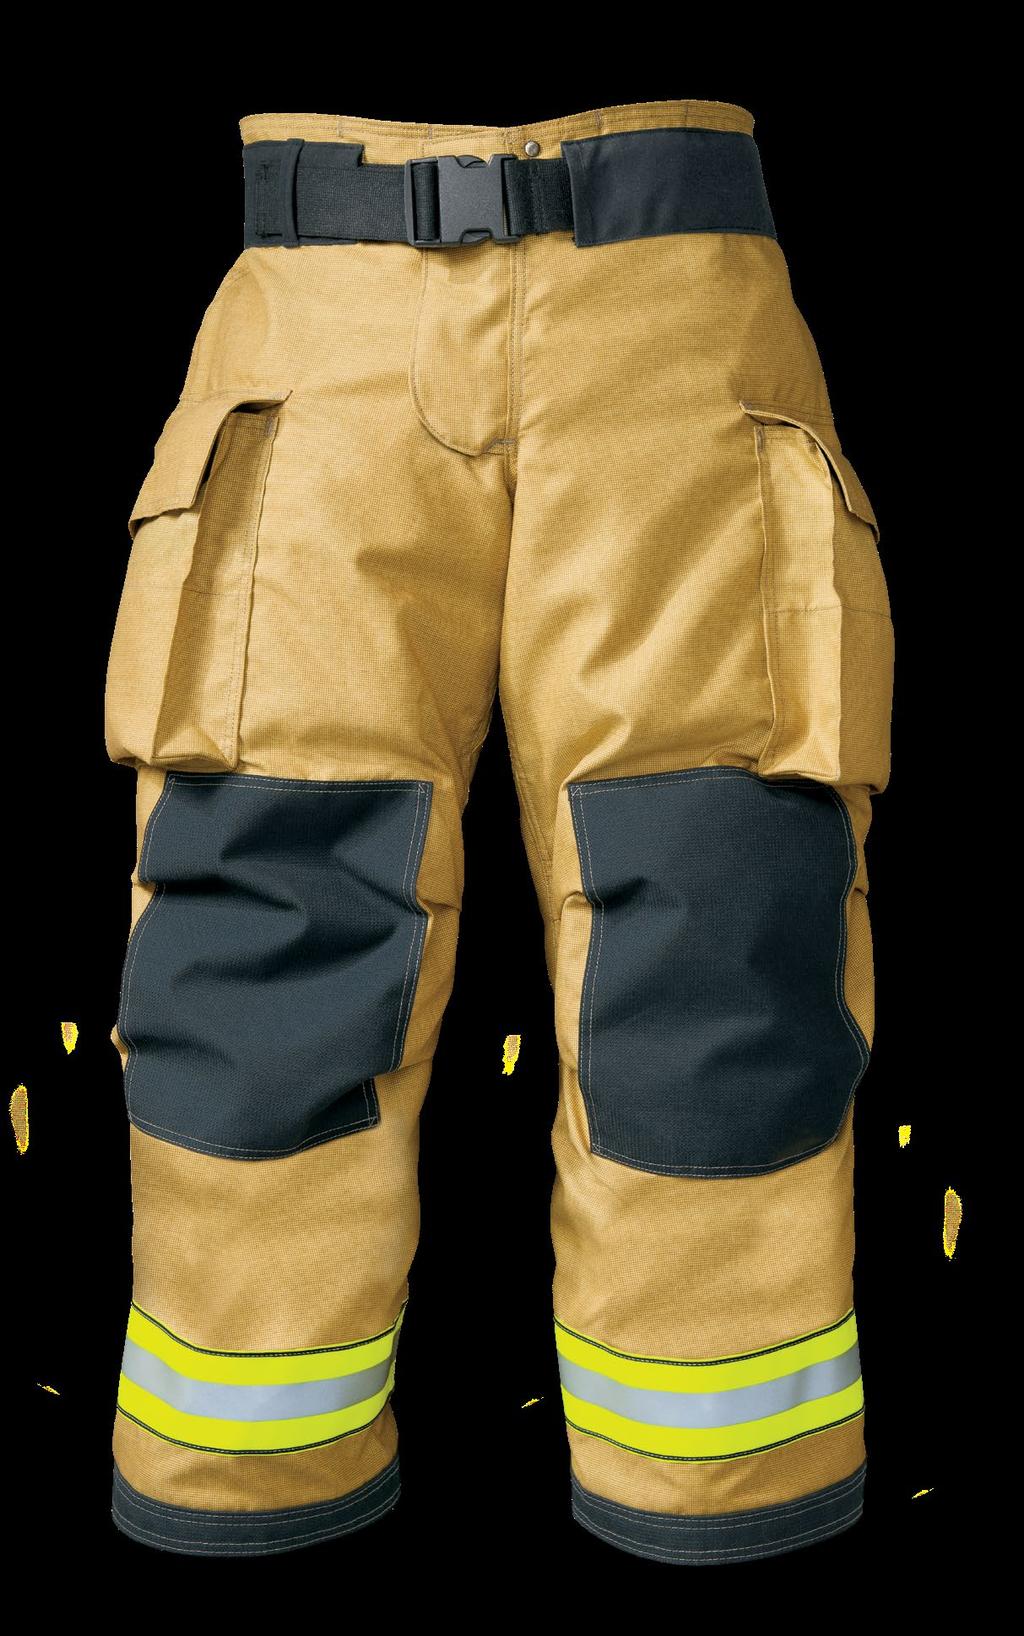 THERMALLY ENHANCED KNEES add a layer of thermal and moisture barrier to protect this high-compression area. Optional SILIZONE KNEE PADDING on liner.